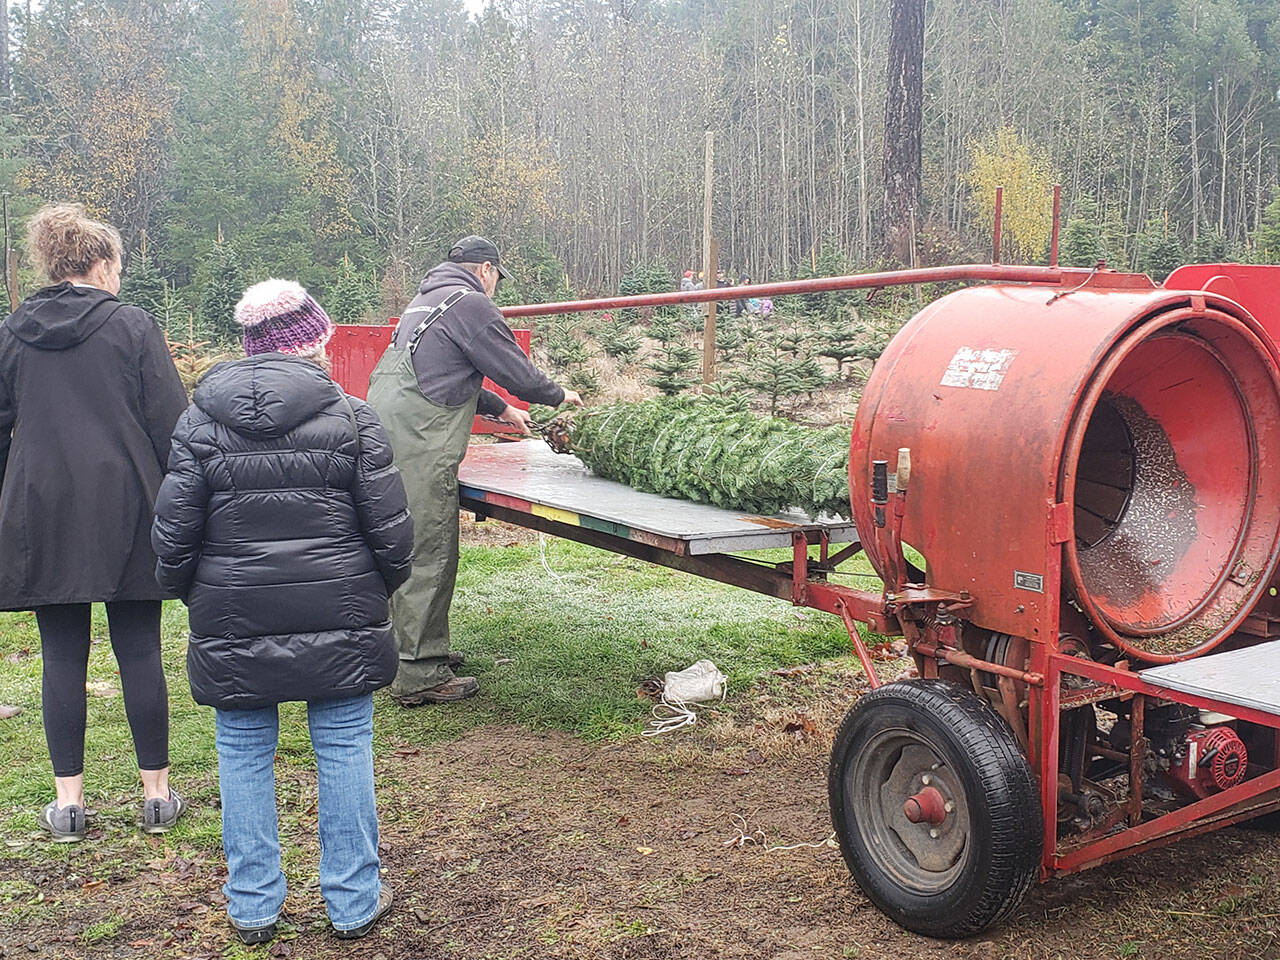 A Christmas tree is put through a tree baler which compresses the branches tight to the trunk.